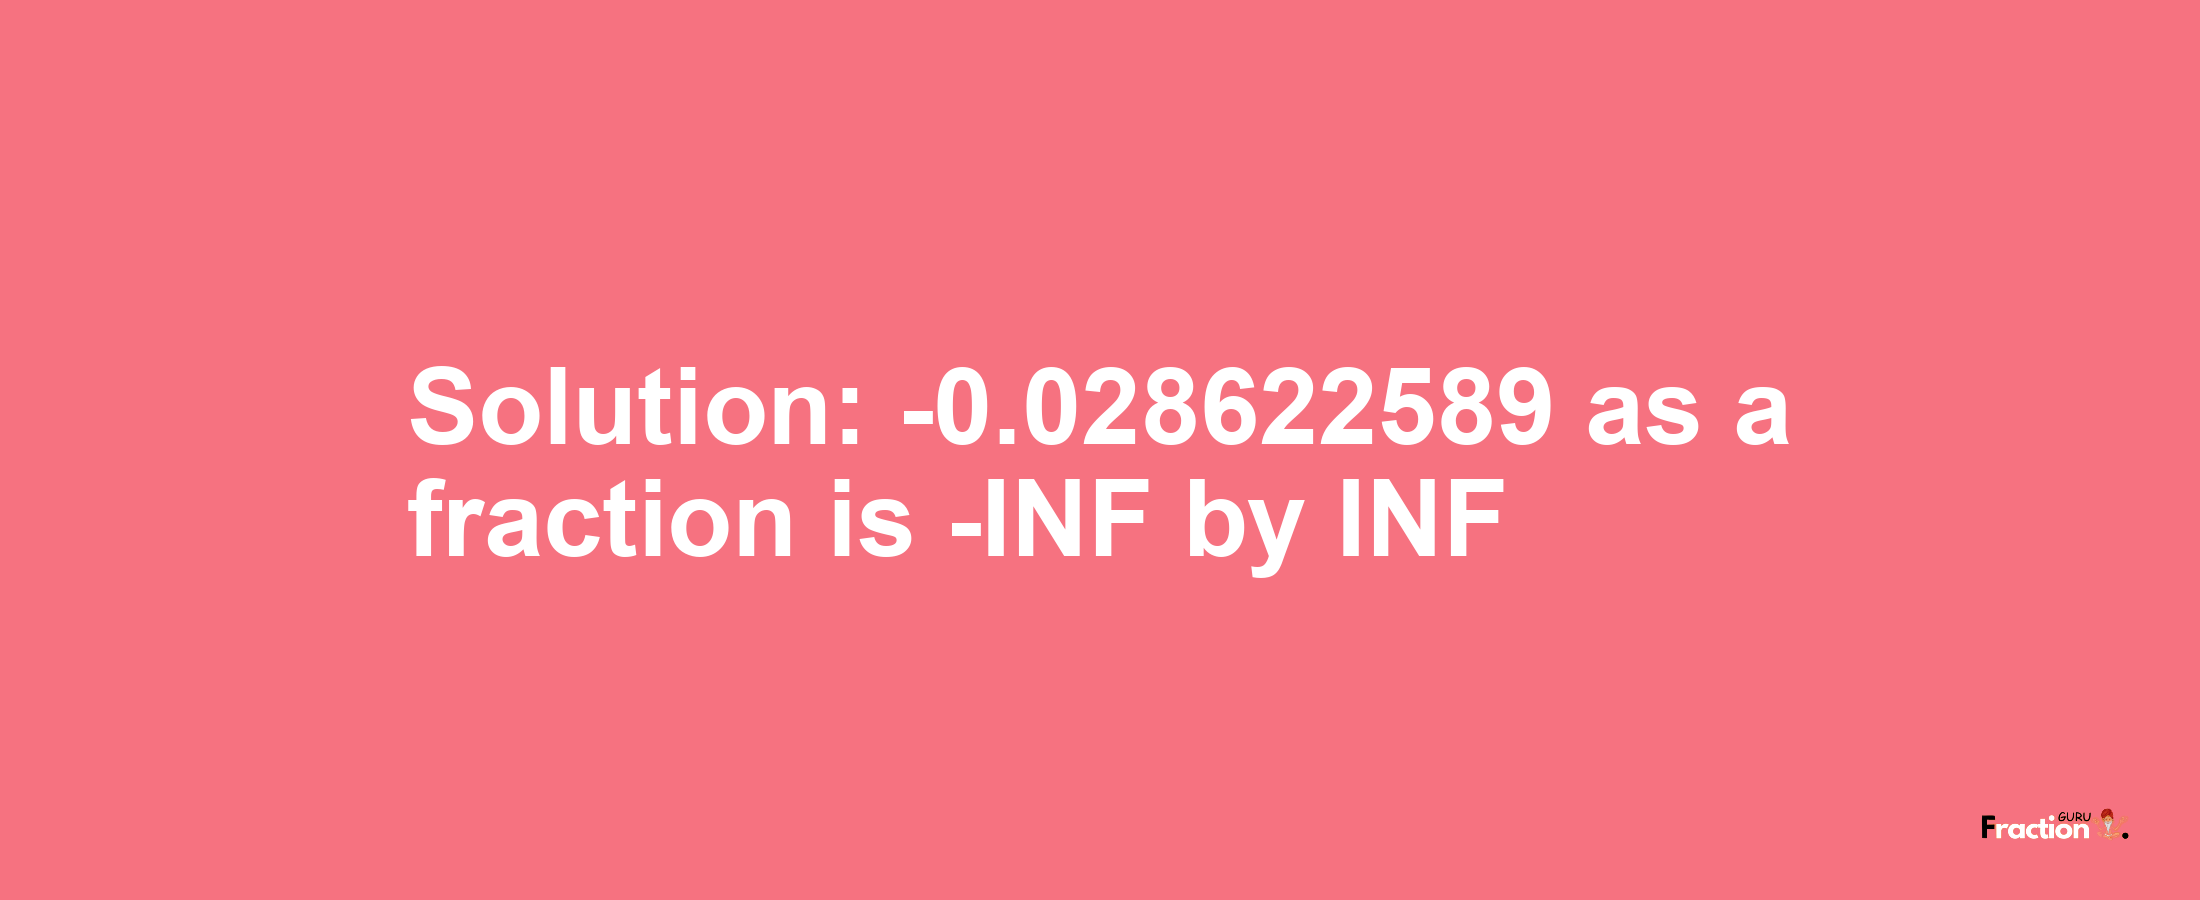 Solution:-0.028622589 as a fraction is -INF/INF